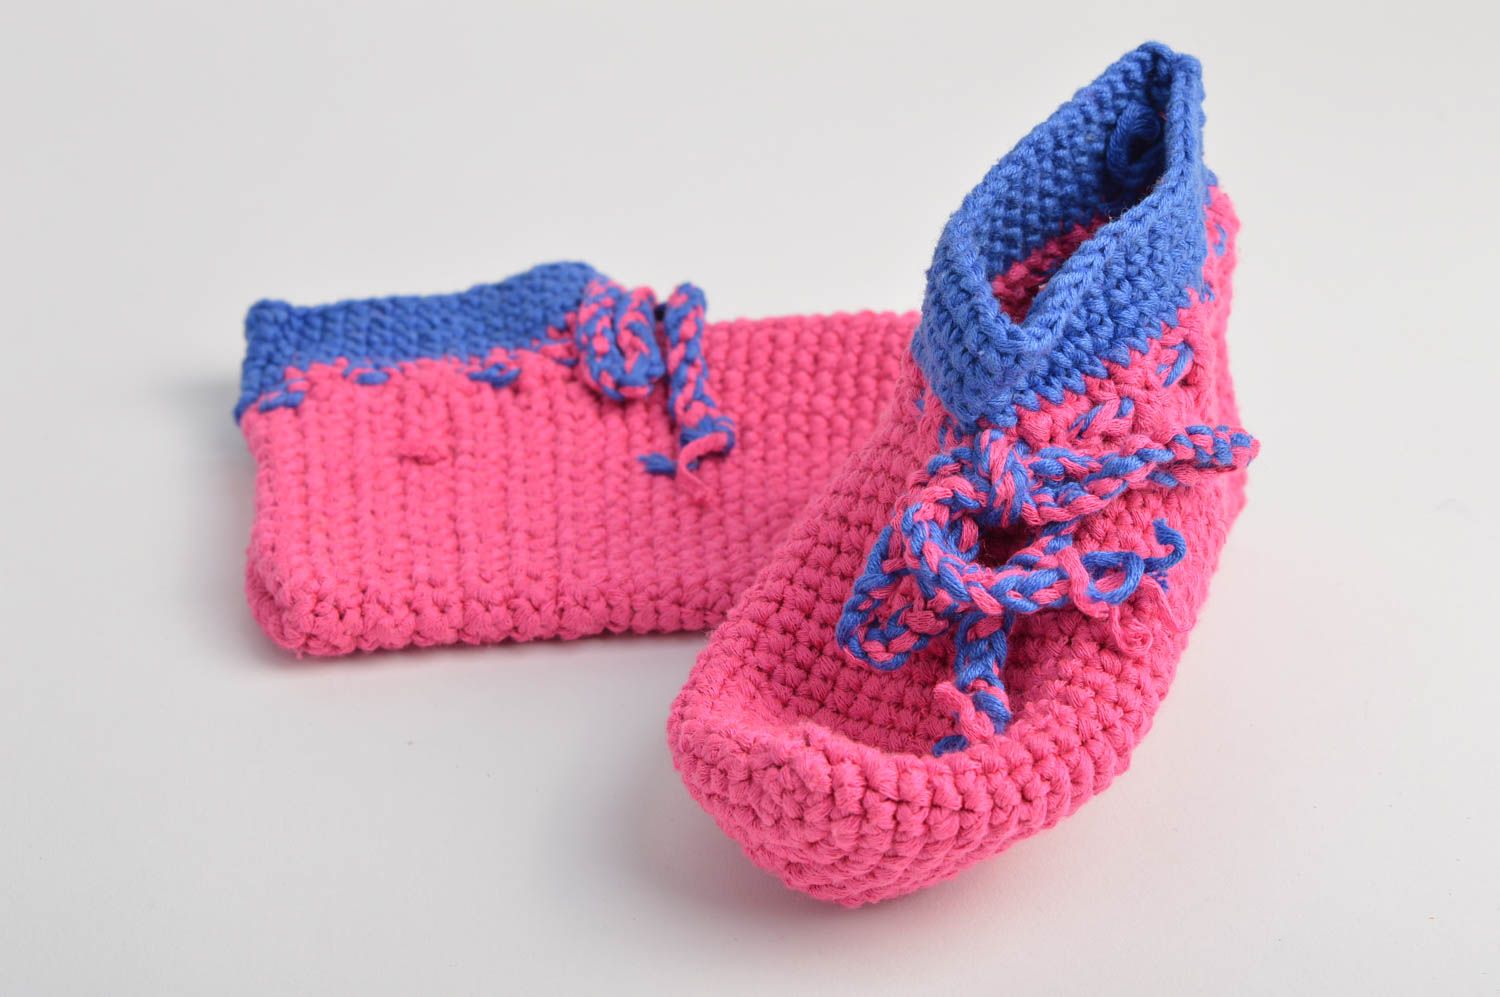 Handmade crochet baby booties goods for children baby shoes best gifts for kids photo 5